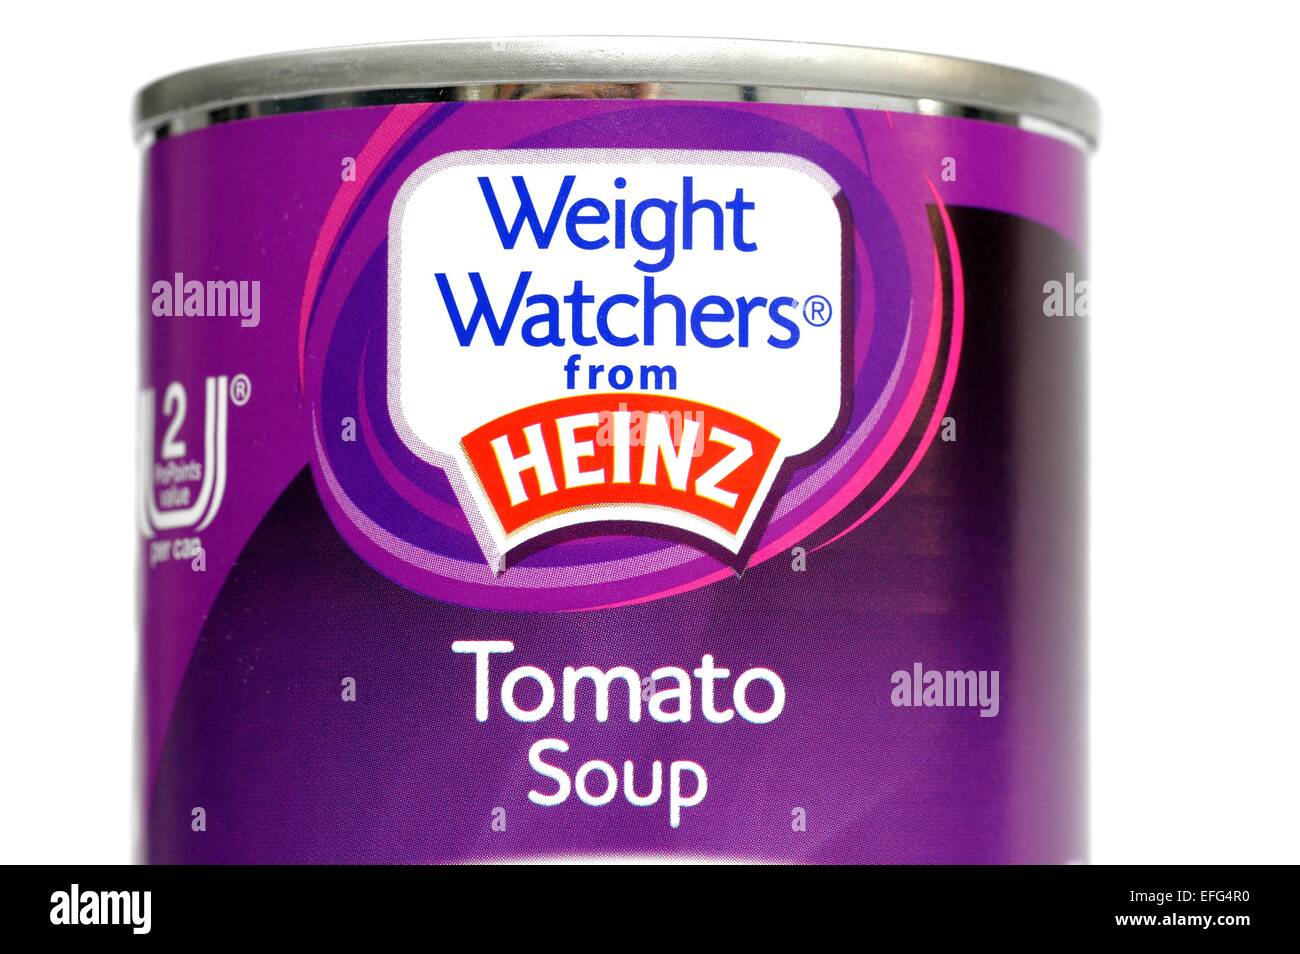 Tin of Heinz weight watchers tomato soup close up Stock Photo